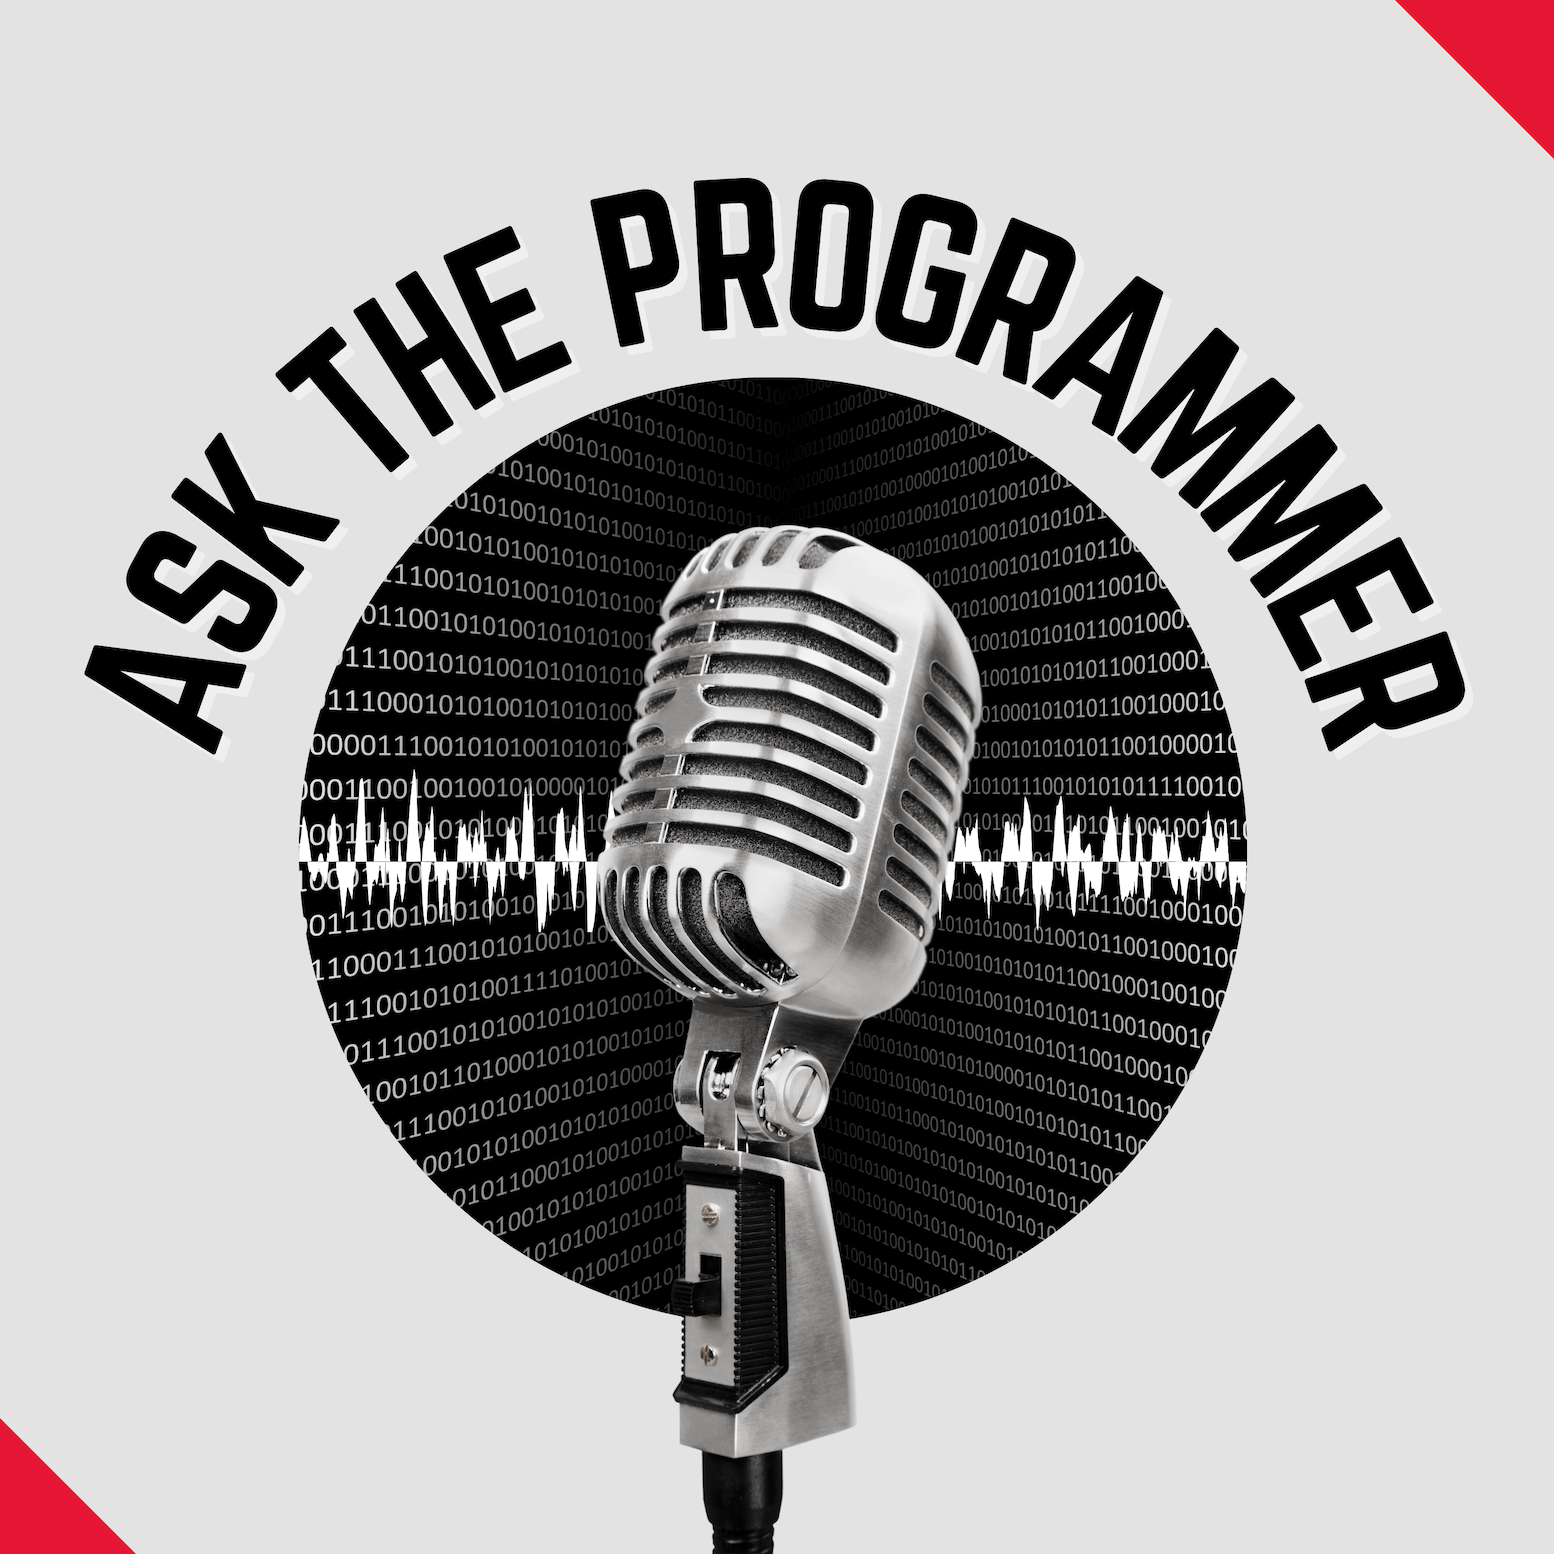 Ask the Programmer